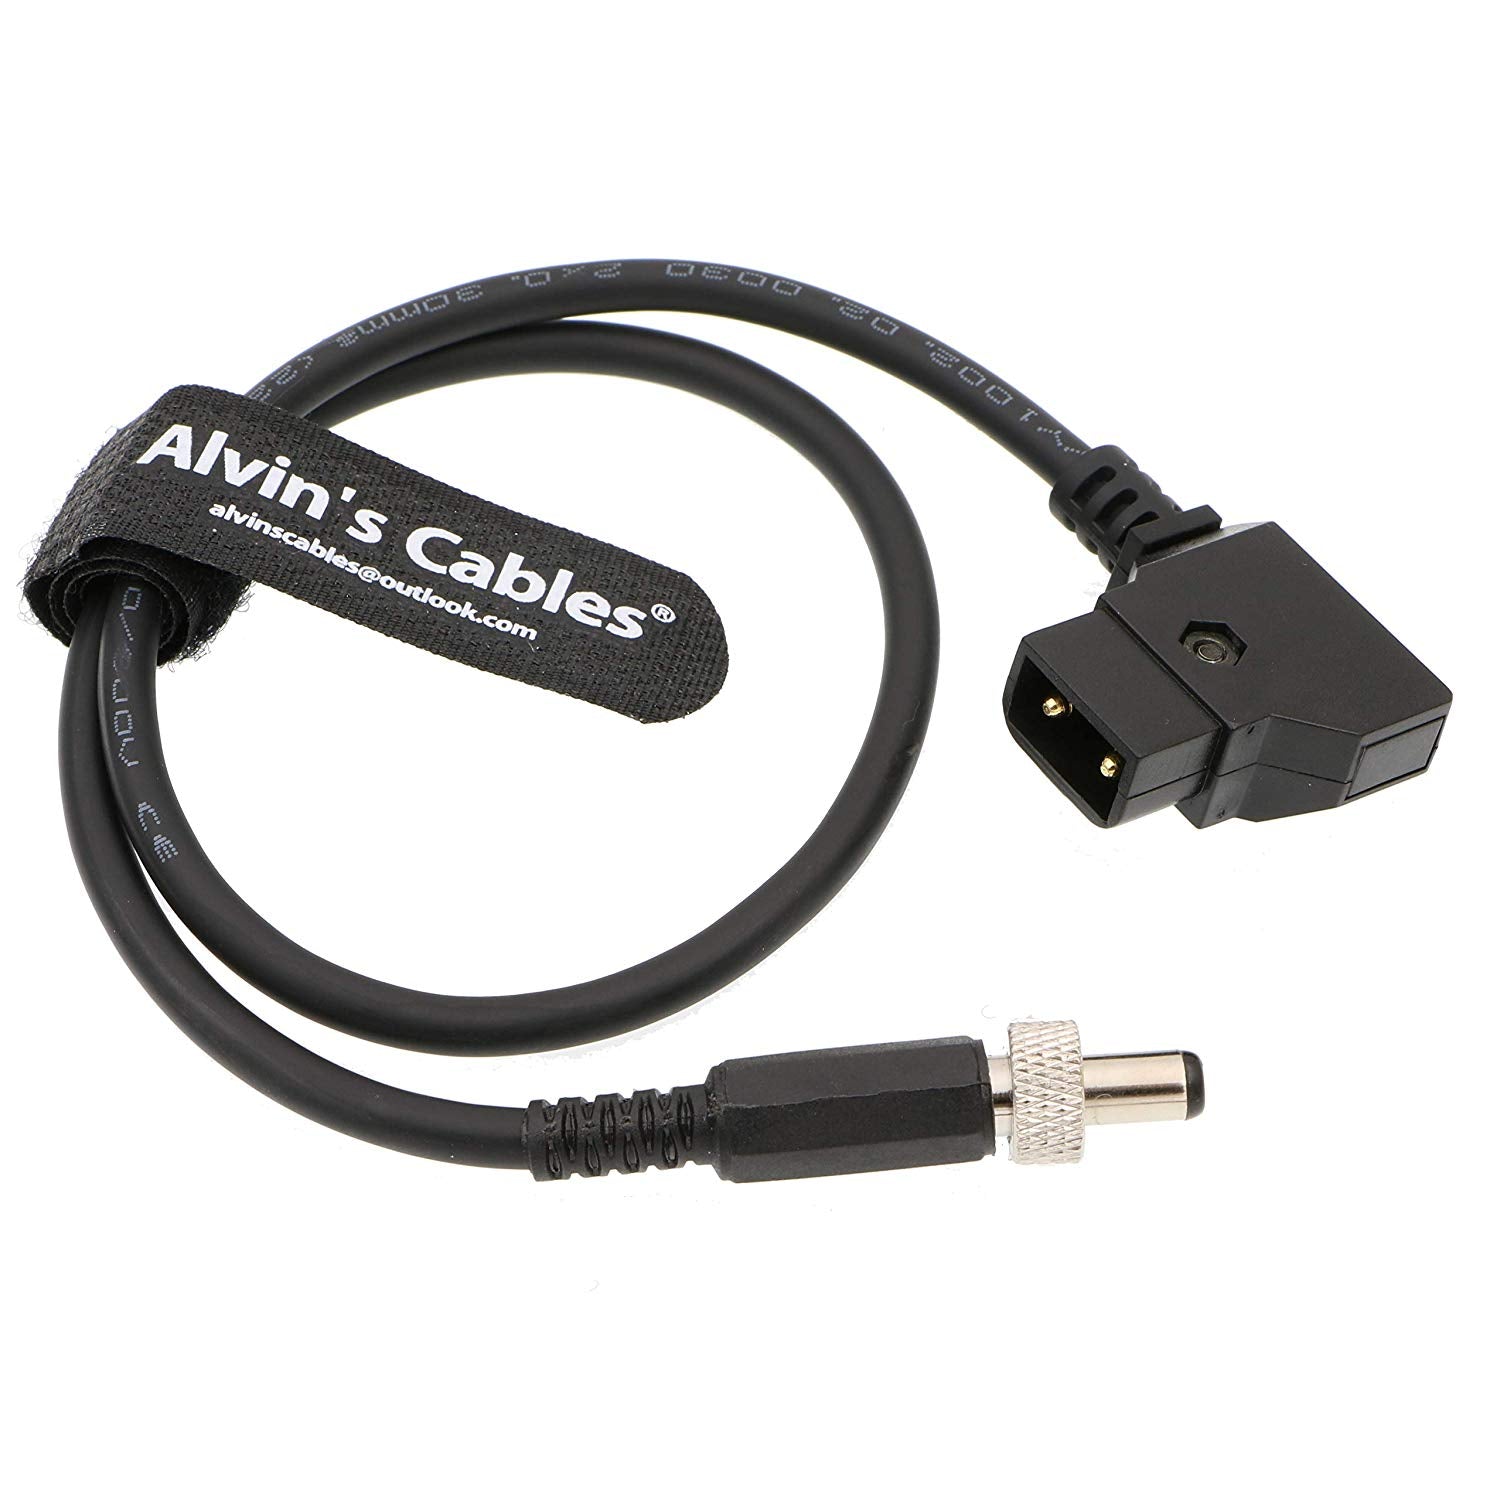 Alvin's Cables Lock DC to D Tap Power Cable for Video Devices PIX-E7 7 Touchscreen Display Hollyland Mars 400s